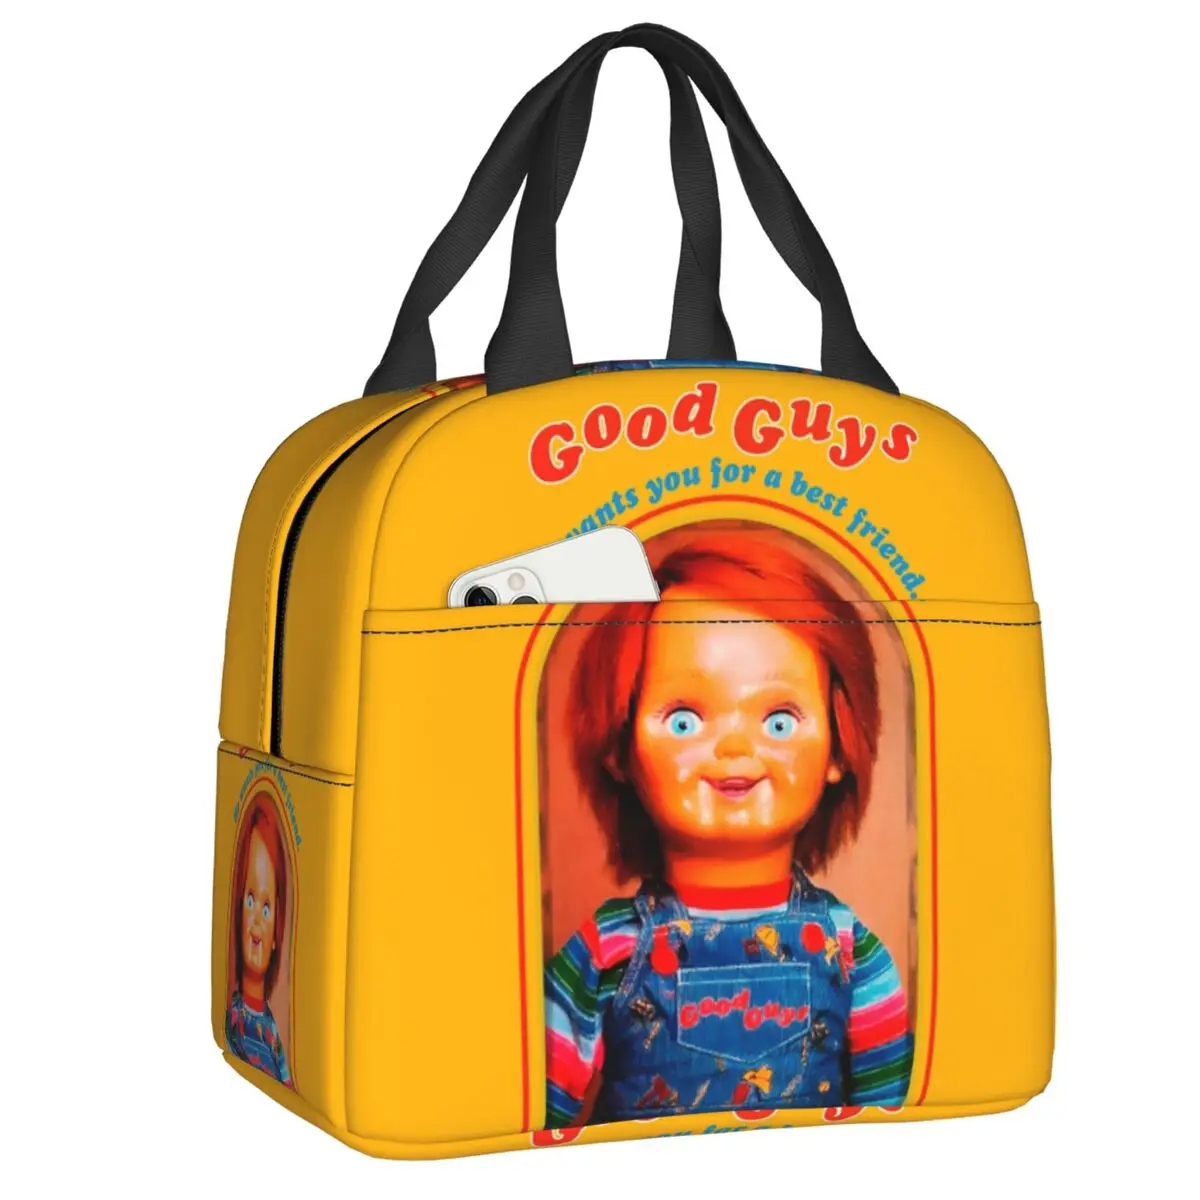 

Chucky Retro Movies Insulated Lunch Bags for Camping Travel Good Guys Game Leakproof Thermal Cooler Bento Box Women Children